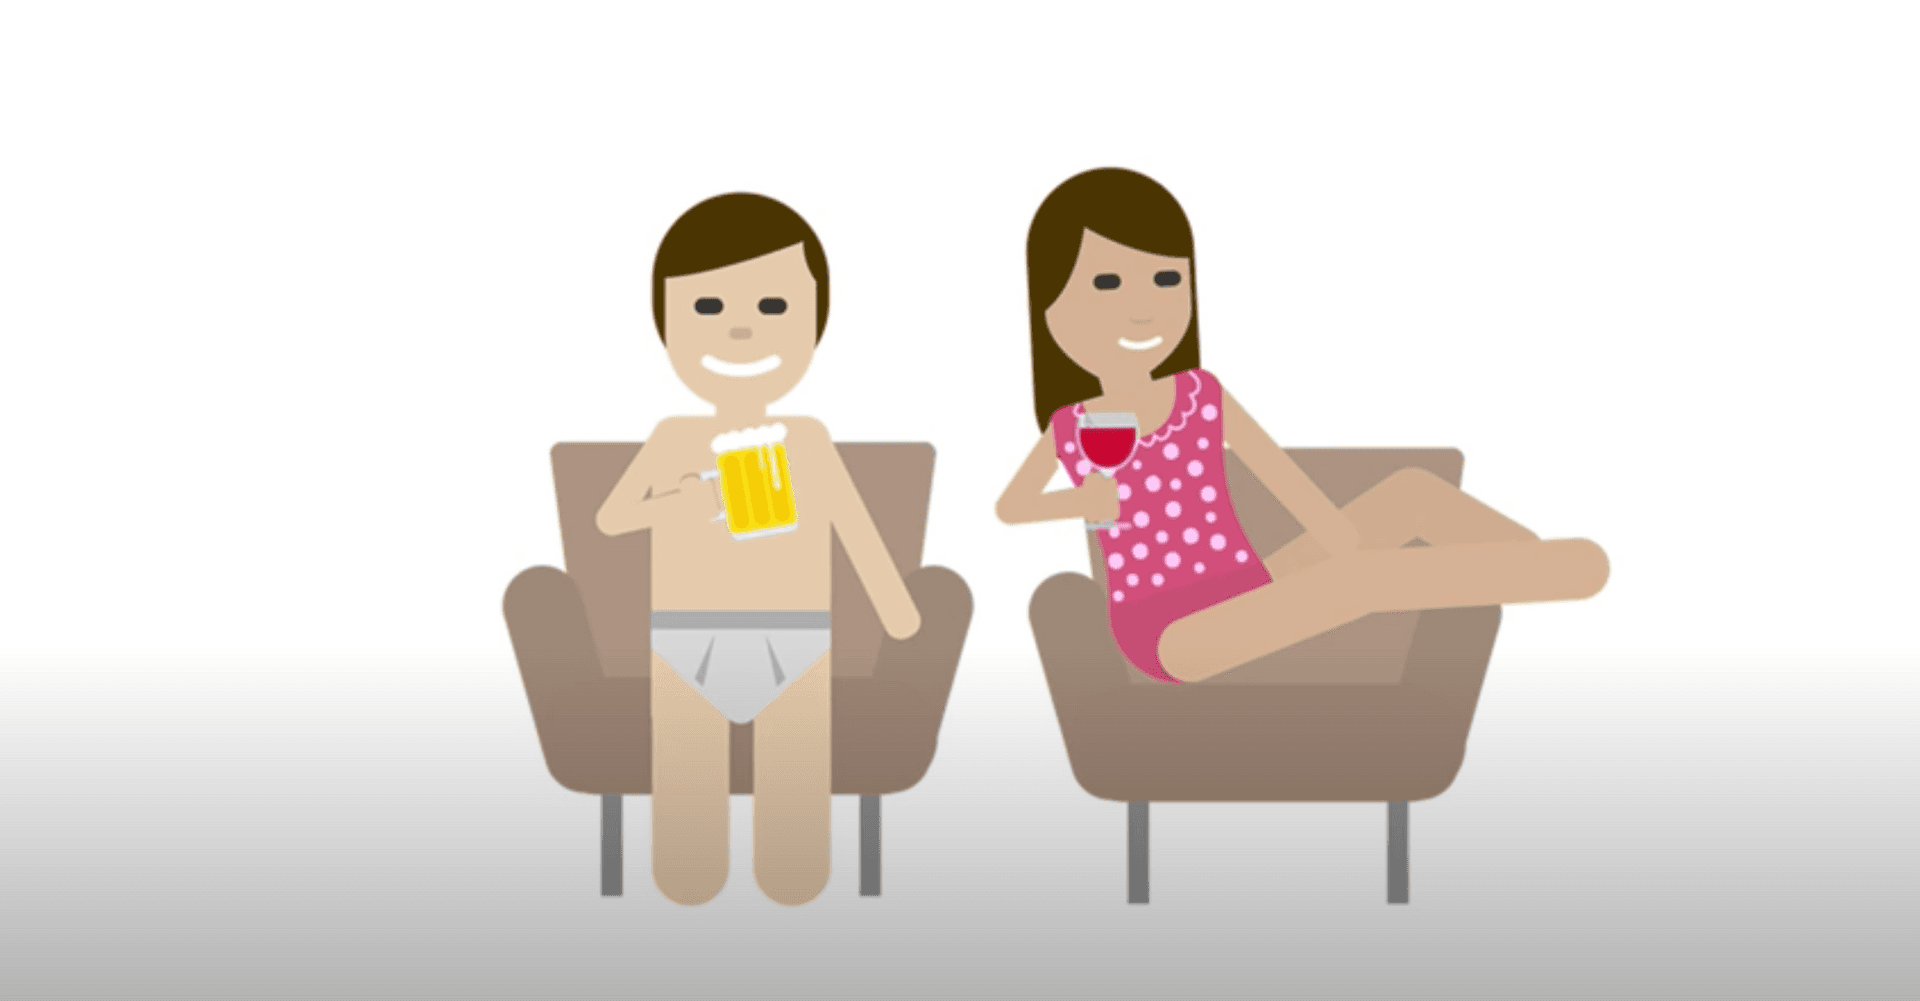 emojis of a man and a woman in their underwear having a drink.